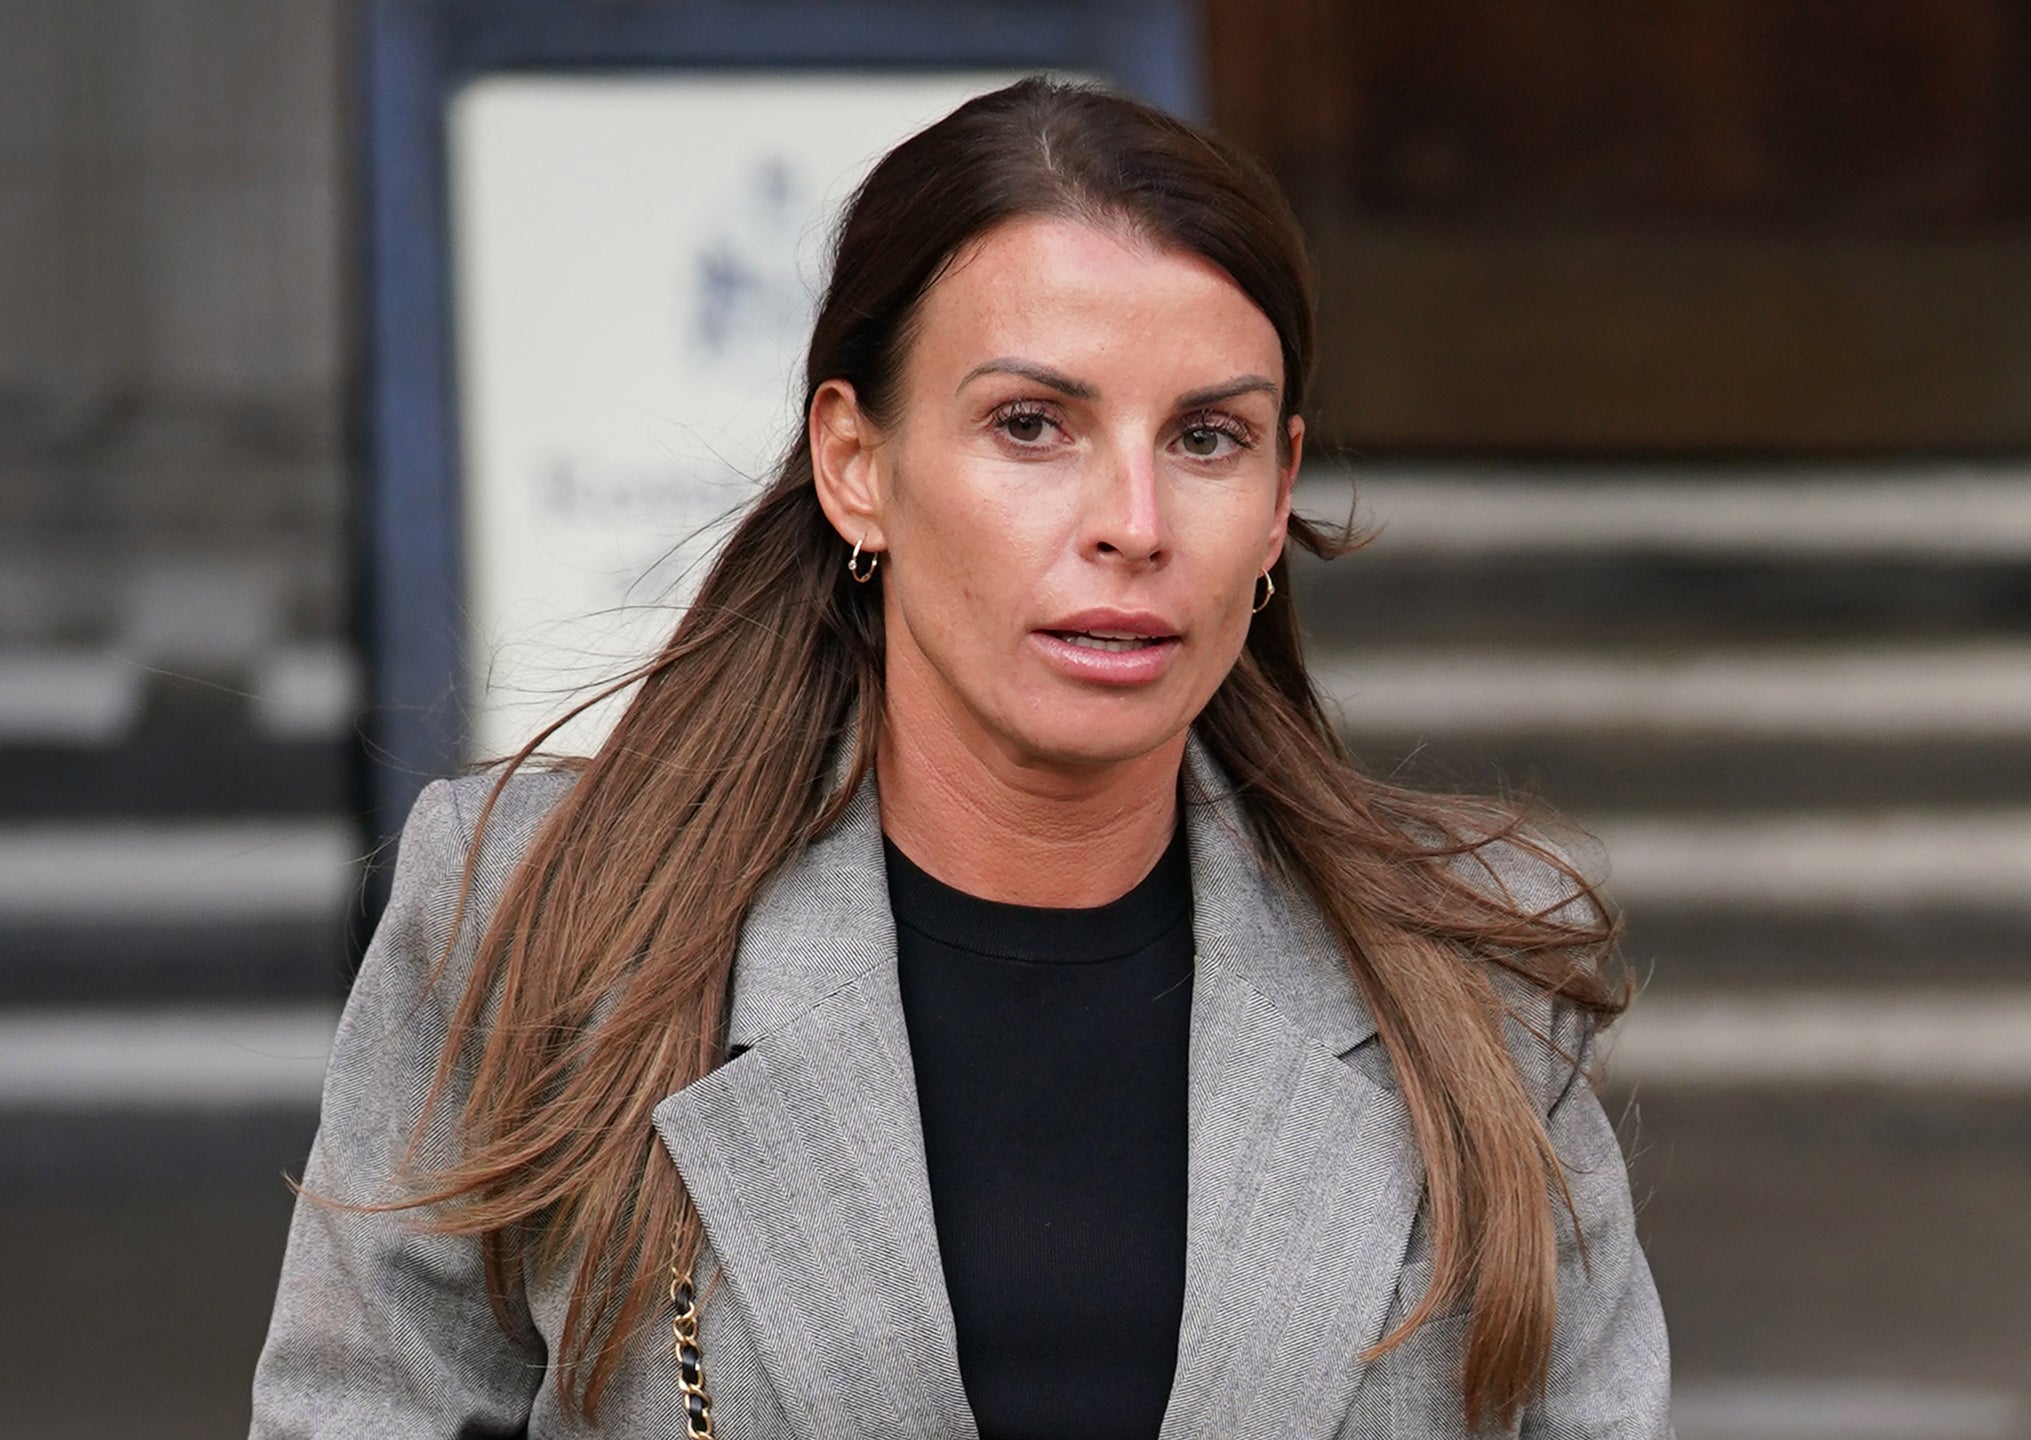 The court heard Coleen Rooney felt she had no choice but to try to expose the source of the leak